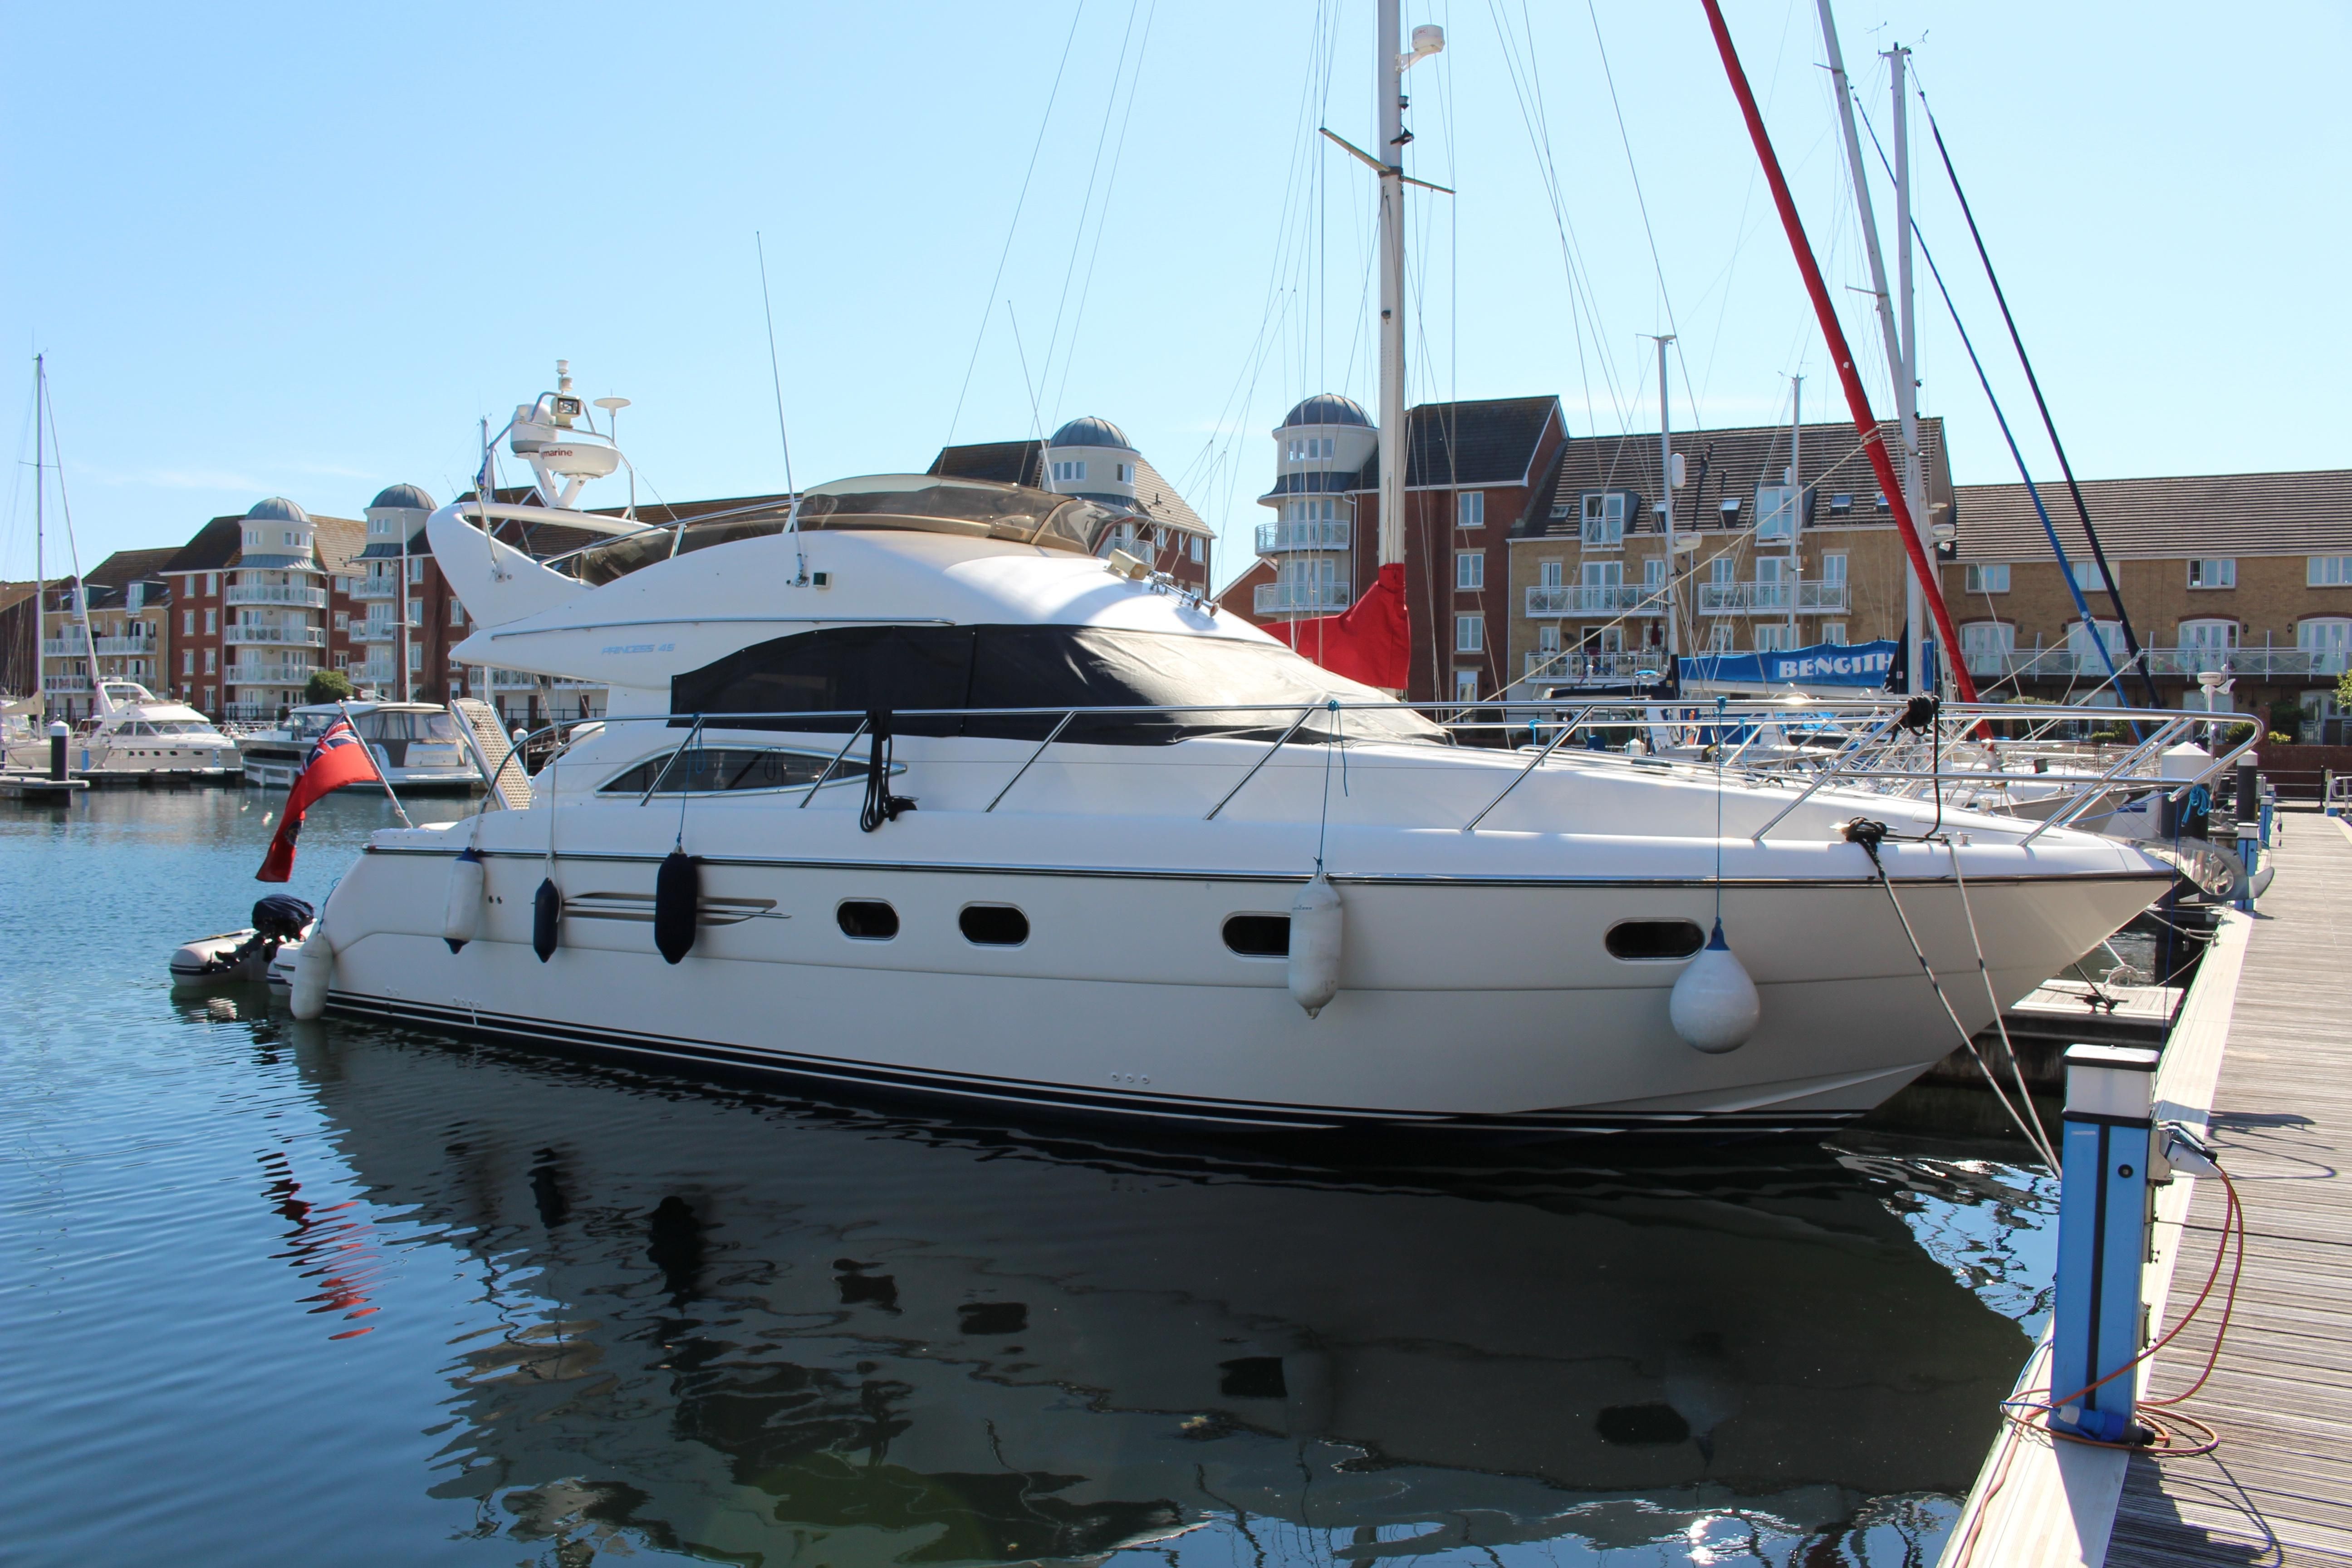 45 ft yacht for sale uk